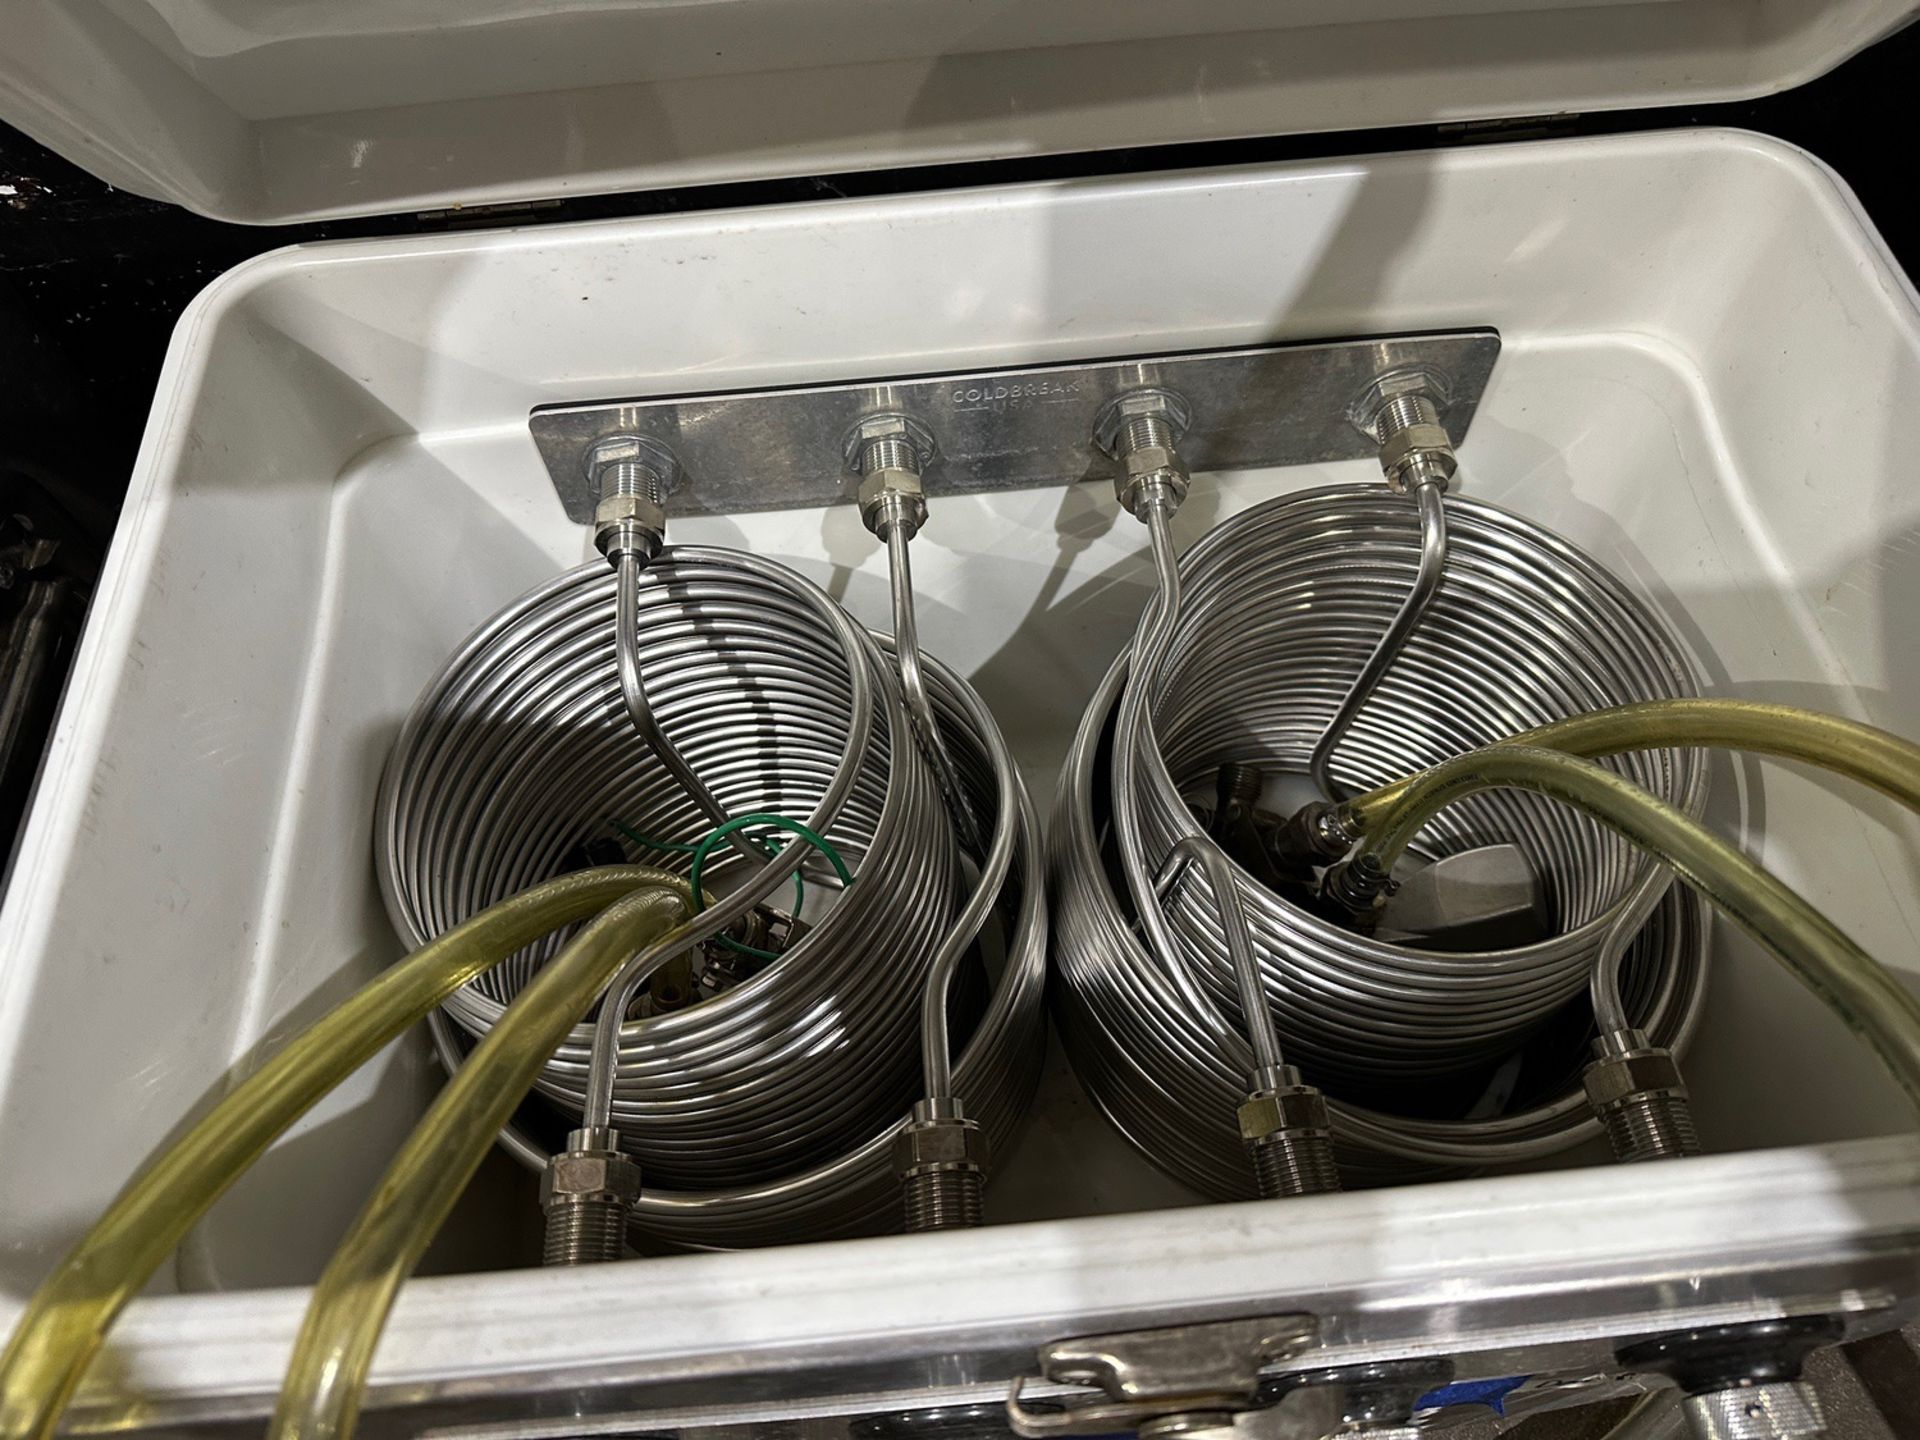 Coldbreak Stainless Steel Jockey Box with (4) Faucets | Rig Fee $20 - Image 2 of 3